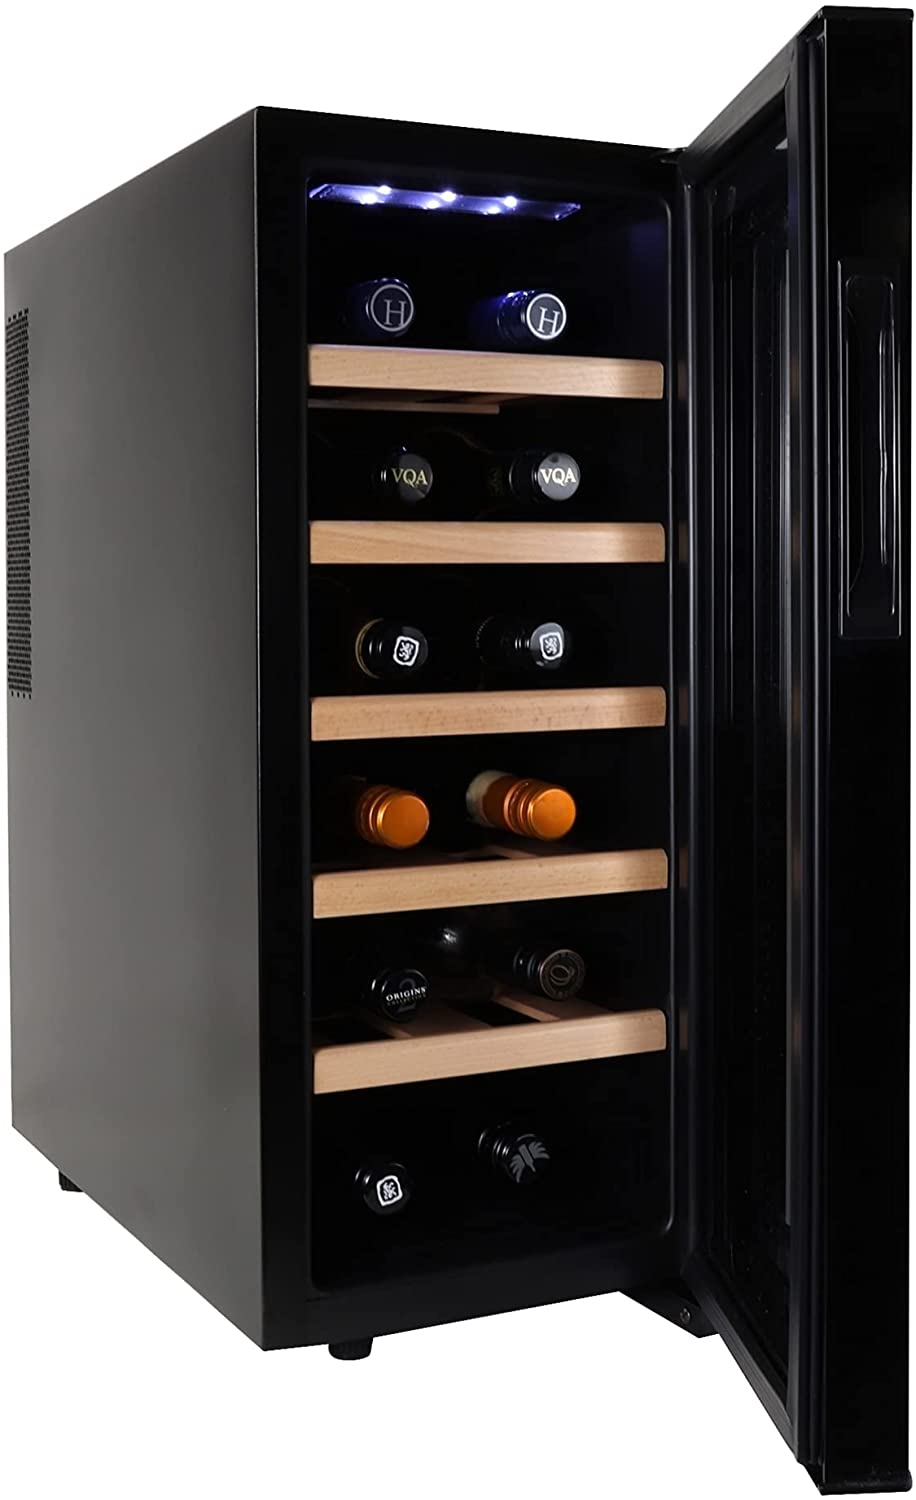 Koolatron WC12-35D 12 Bottle Capacity Thermoelectric Wine Cooler (Best Single Zone 12-Bottle Thermoelectric Wine Cooler)